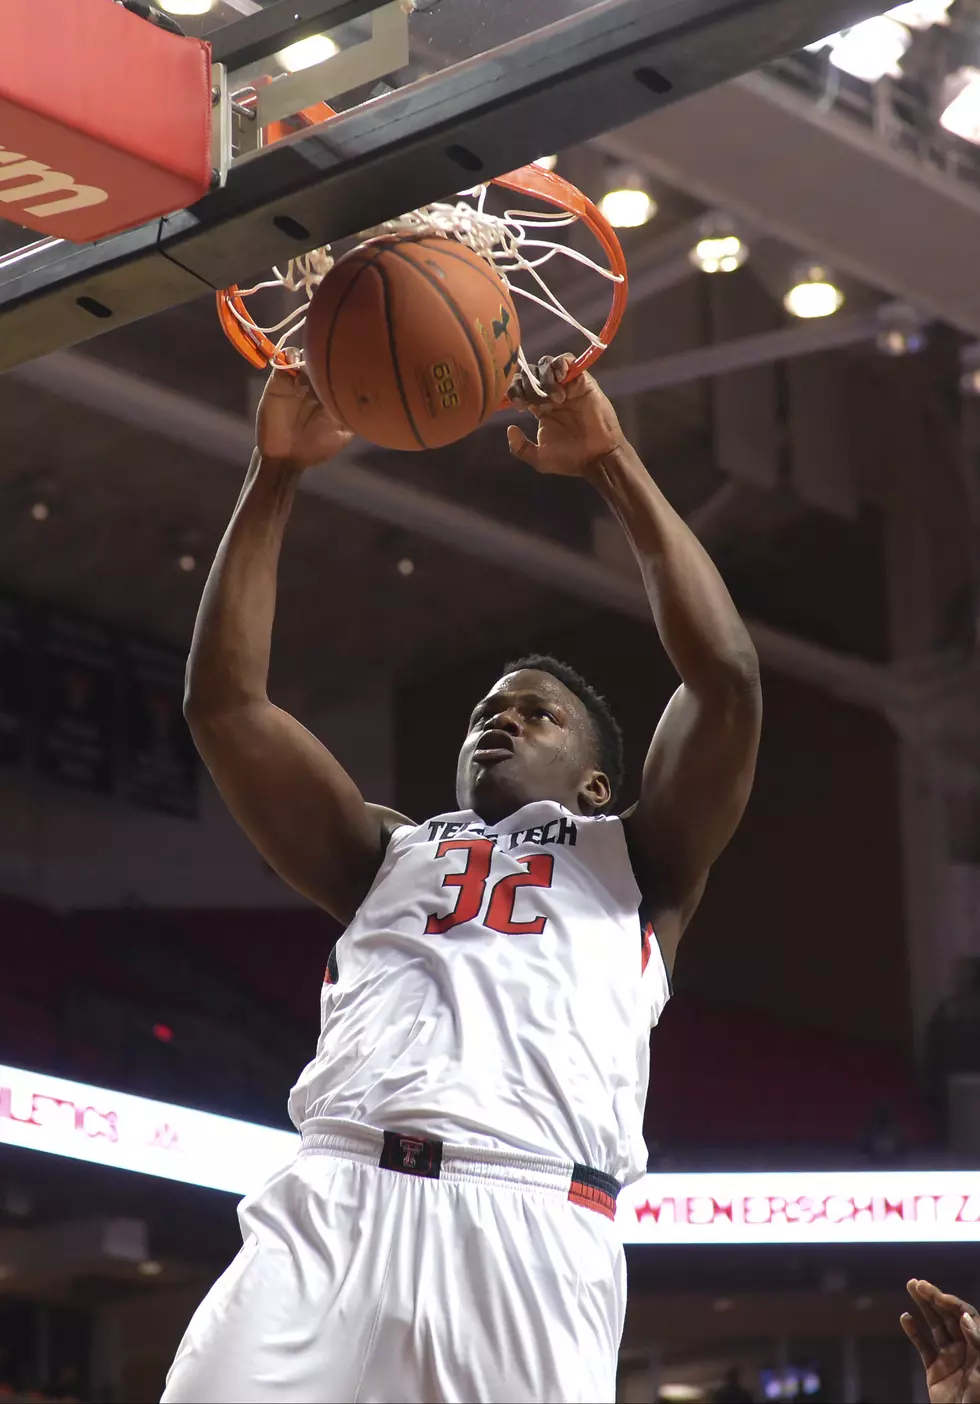 Texas Tech Men’s Basketball Wins Big at Home Against Sam Houston State